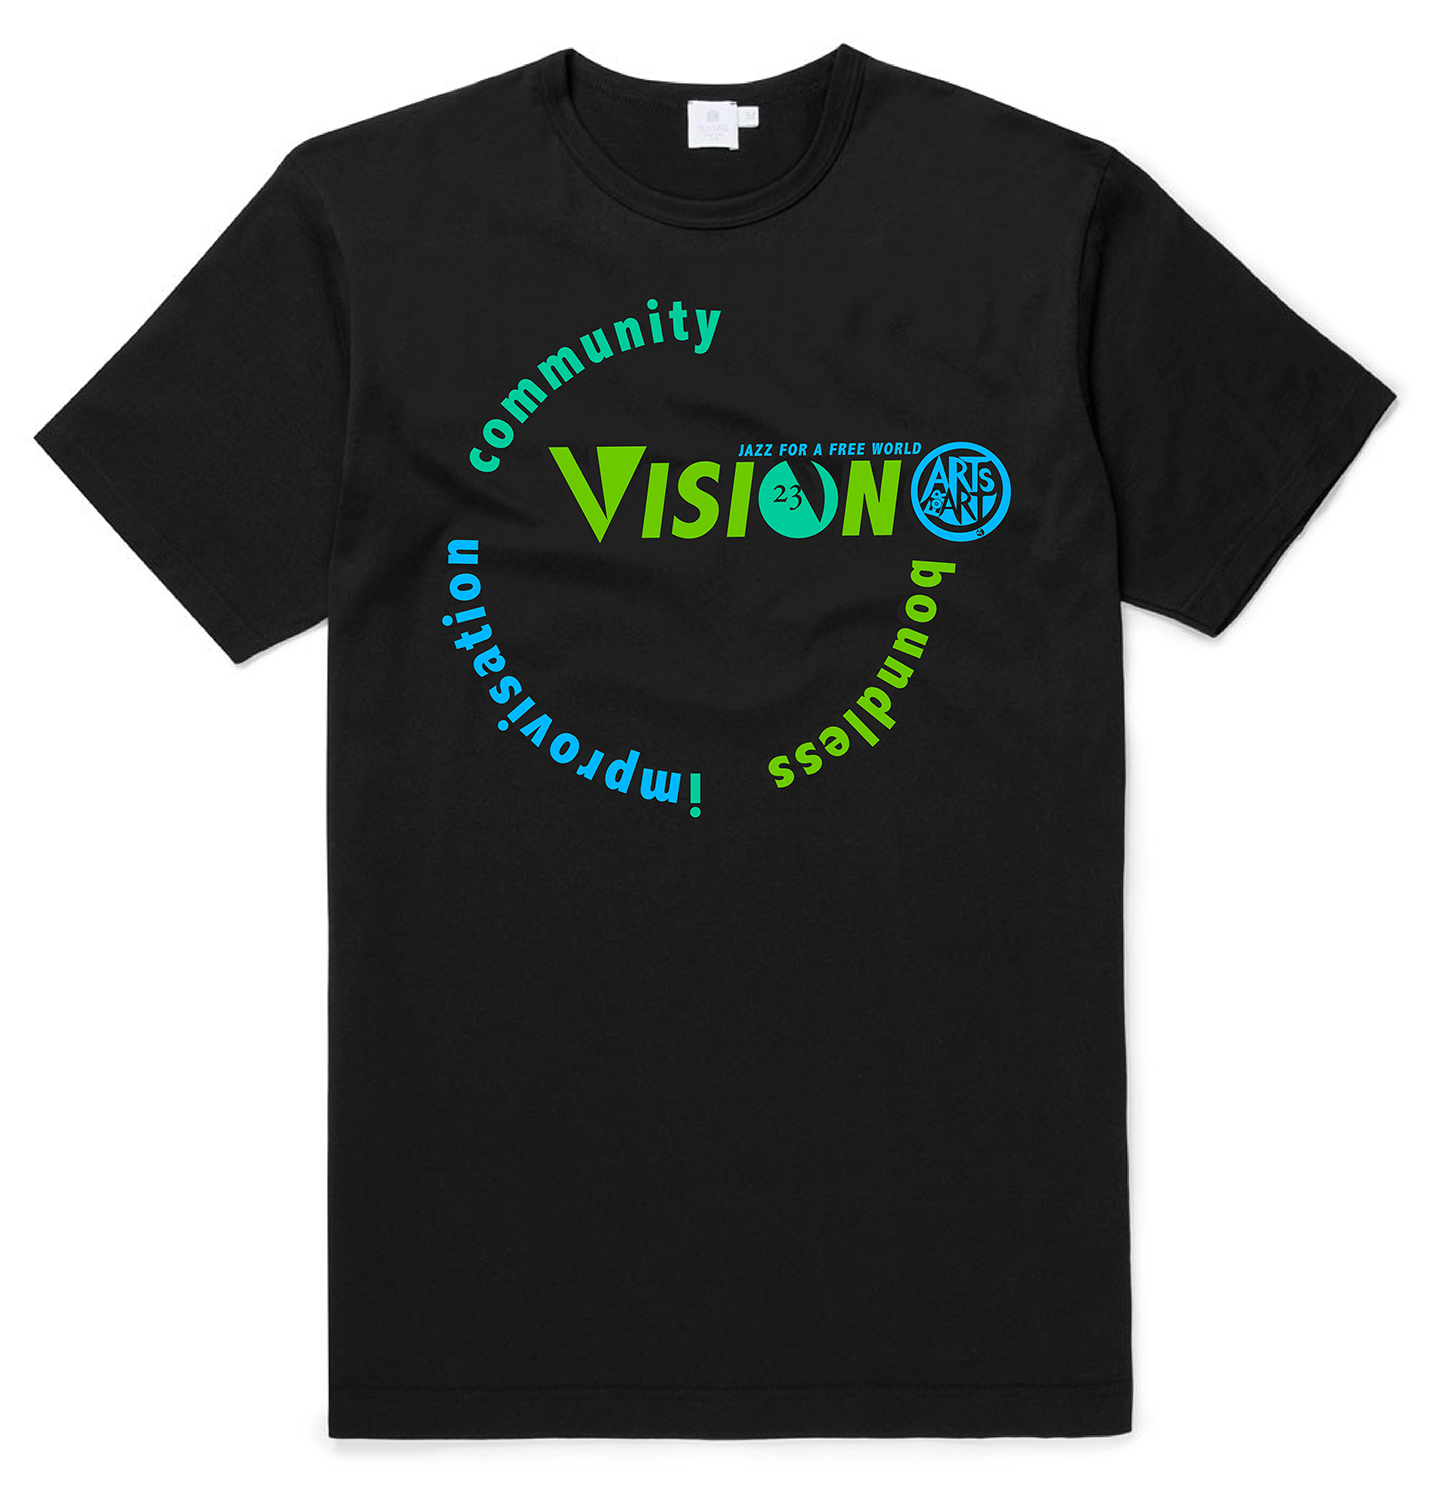 Vision23 t-shirt with colorful logo